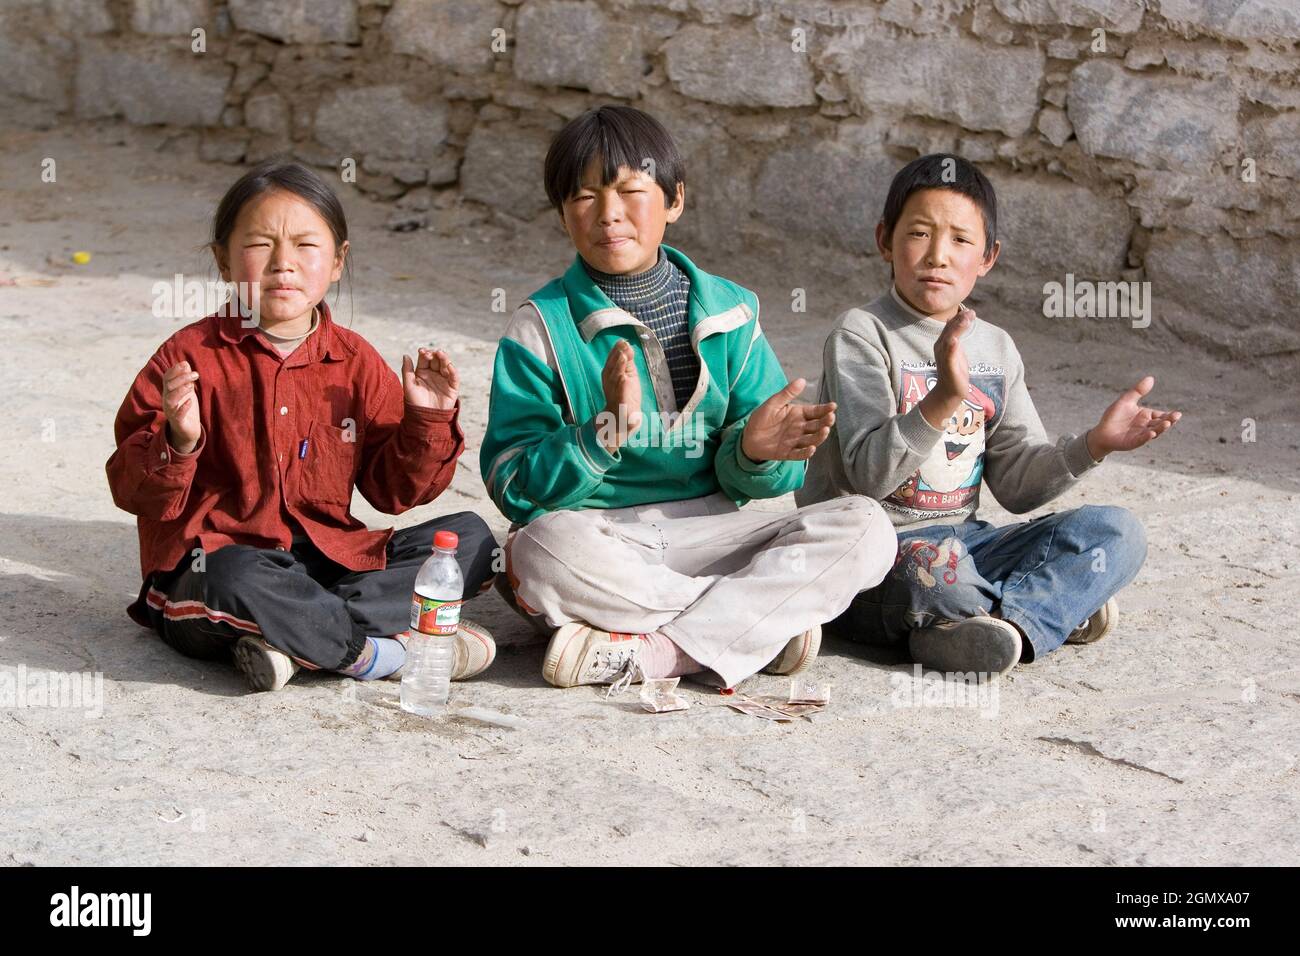 Lhasa, Tibet - 21 October 2006; sitting children, clapping Three youthful faces that are full of character. Despite all of Tibet's travails and strugg Stock Photo